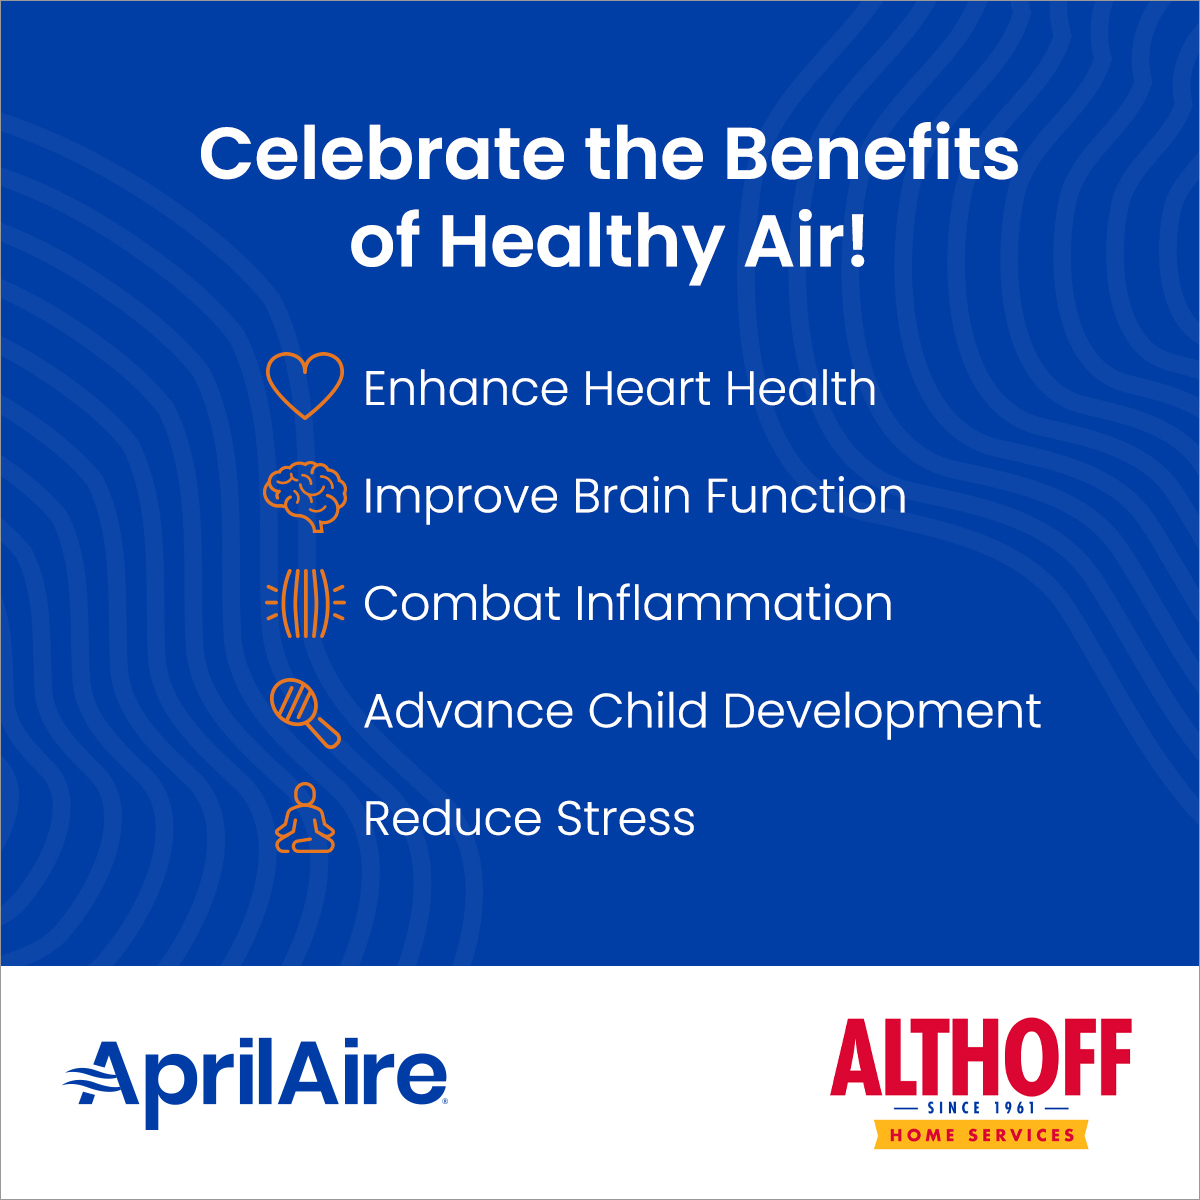 In honor of #HealthyAir, we're celebrating all the different ways that breathing Healthy Air can benefit you! With @AprilAire Healthy Air solutions, you can improve productivity, prevent illness, protect, and more!

#AprilAire #HandItOfftoAlthoff